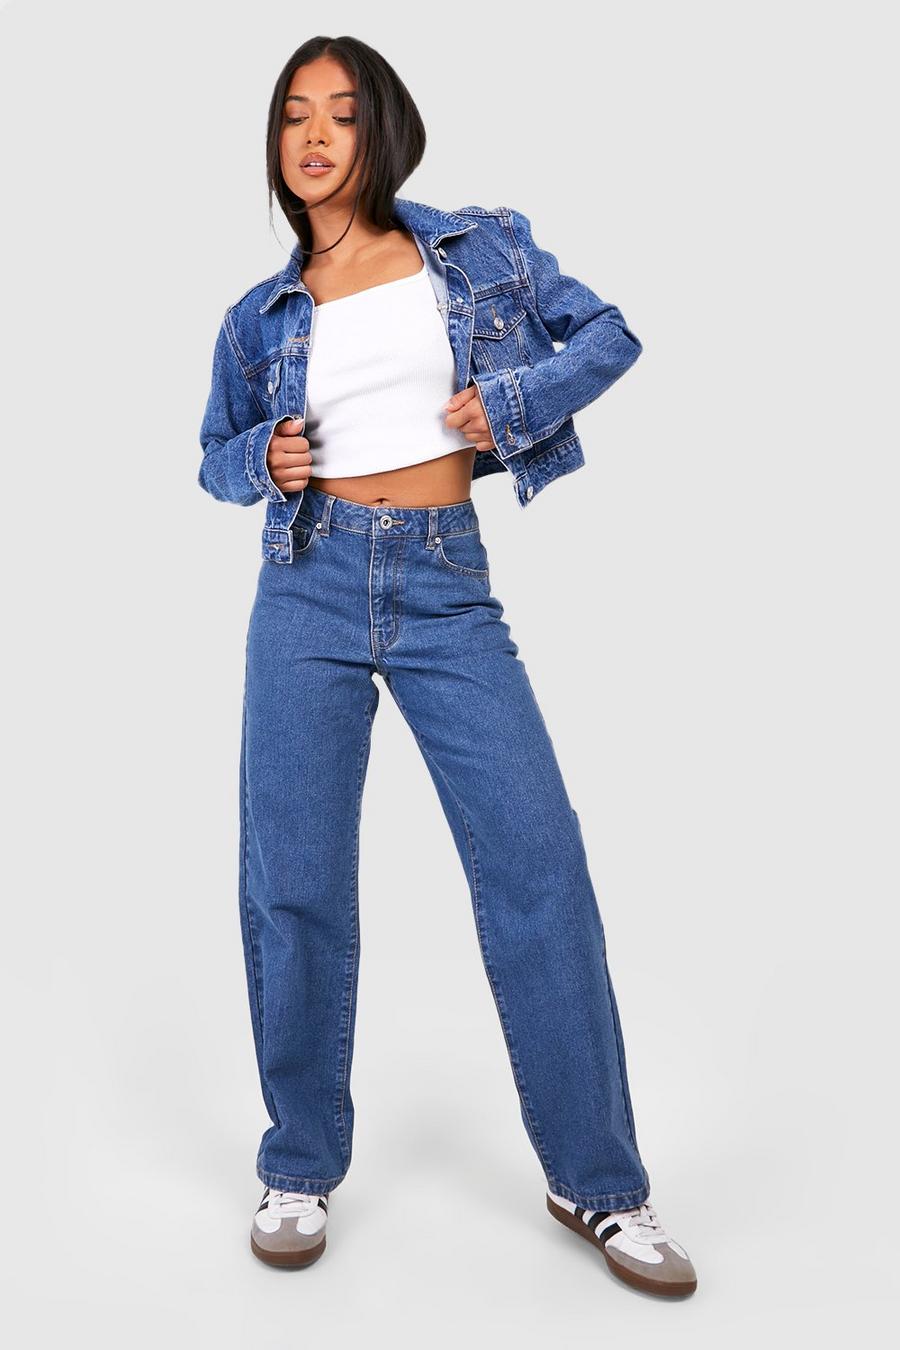 Jeans for Petite Women